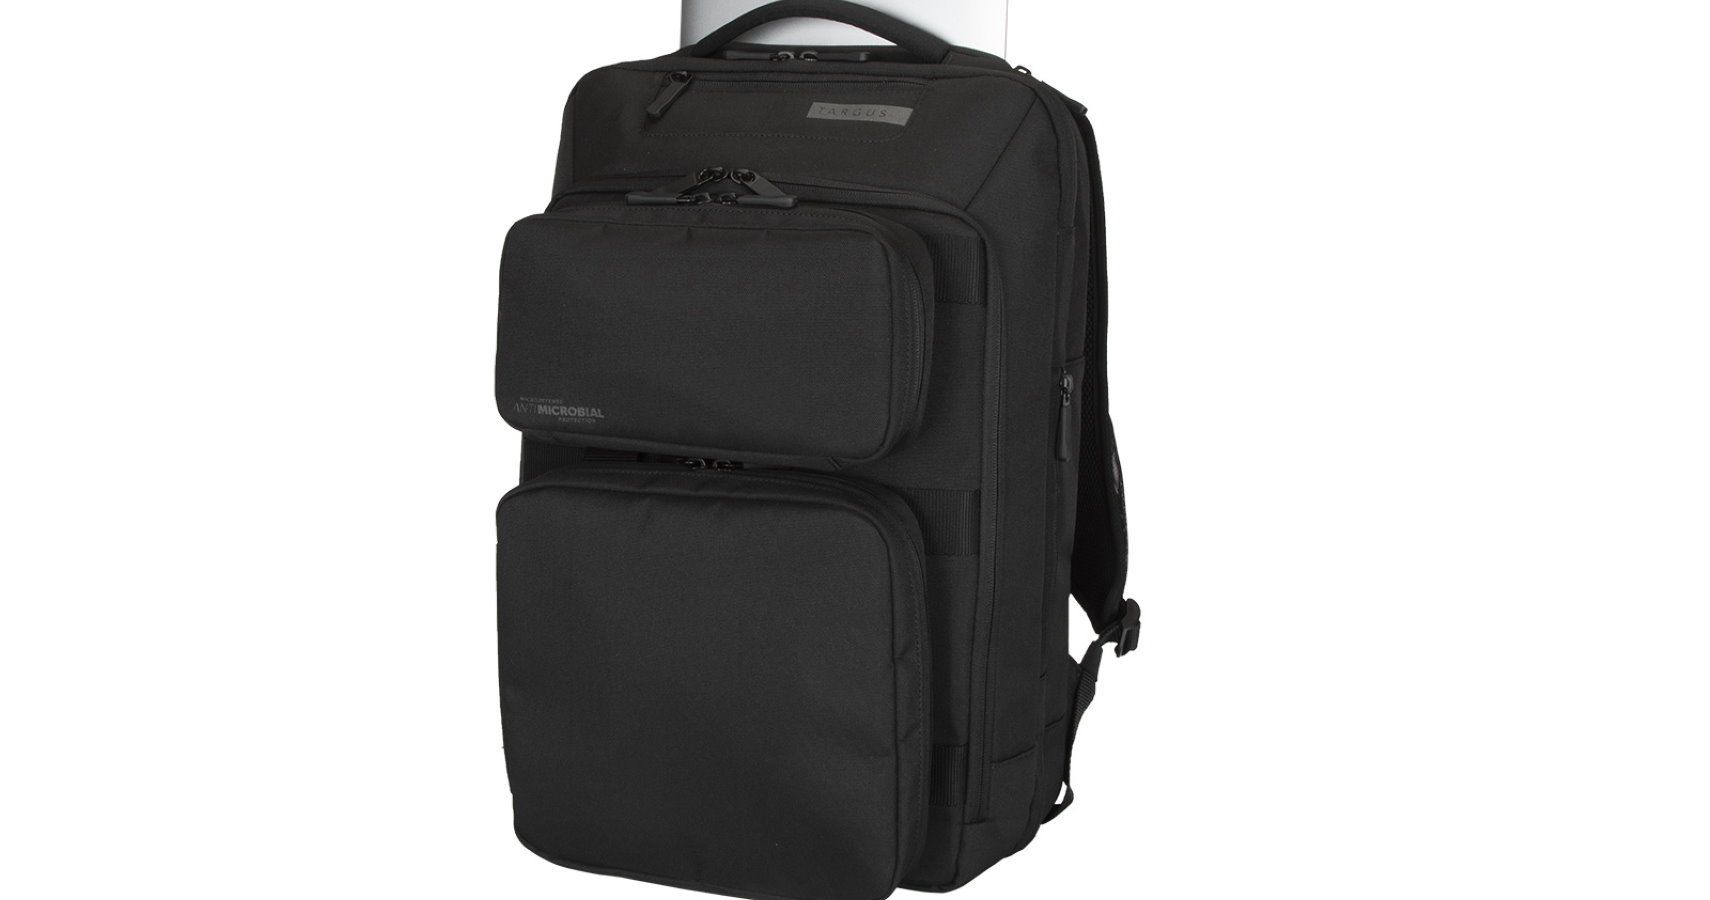 This Laptop Backpack Will Help You Survive The Pandemic (No Really)